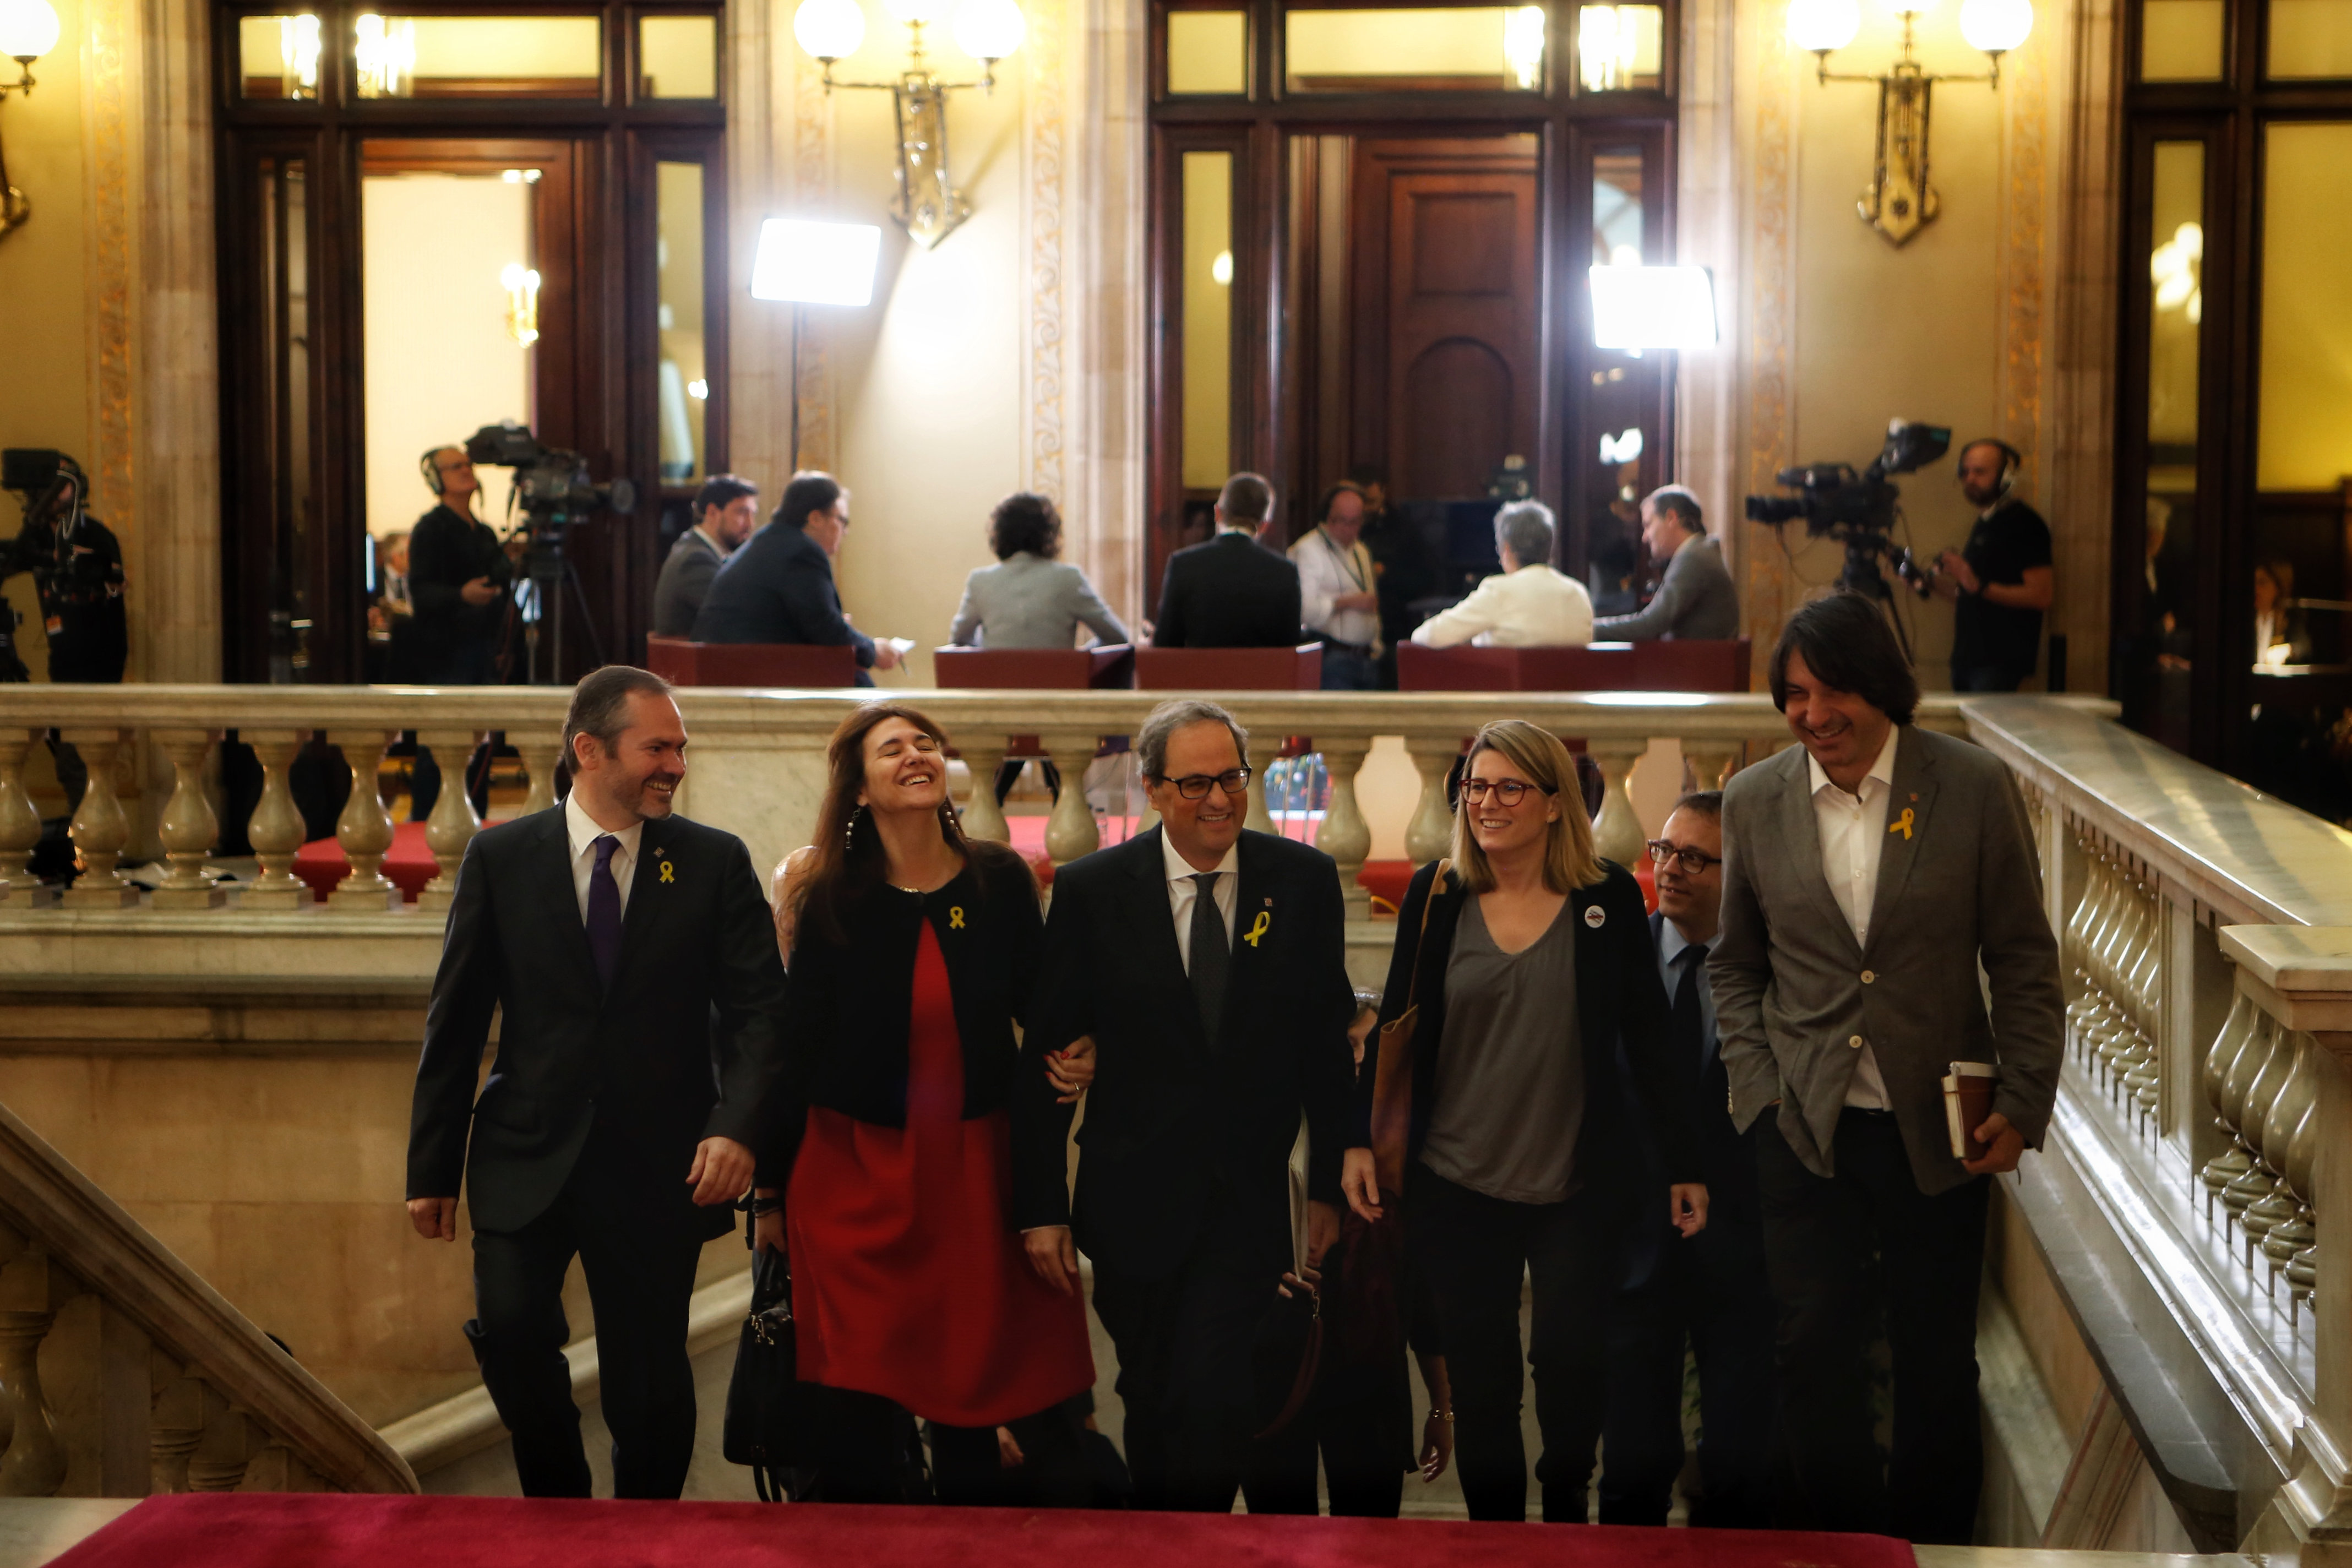 Quim Torra arrives in Parliament flanked by fellow MPs (by ACN)